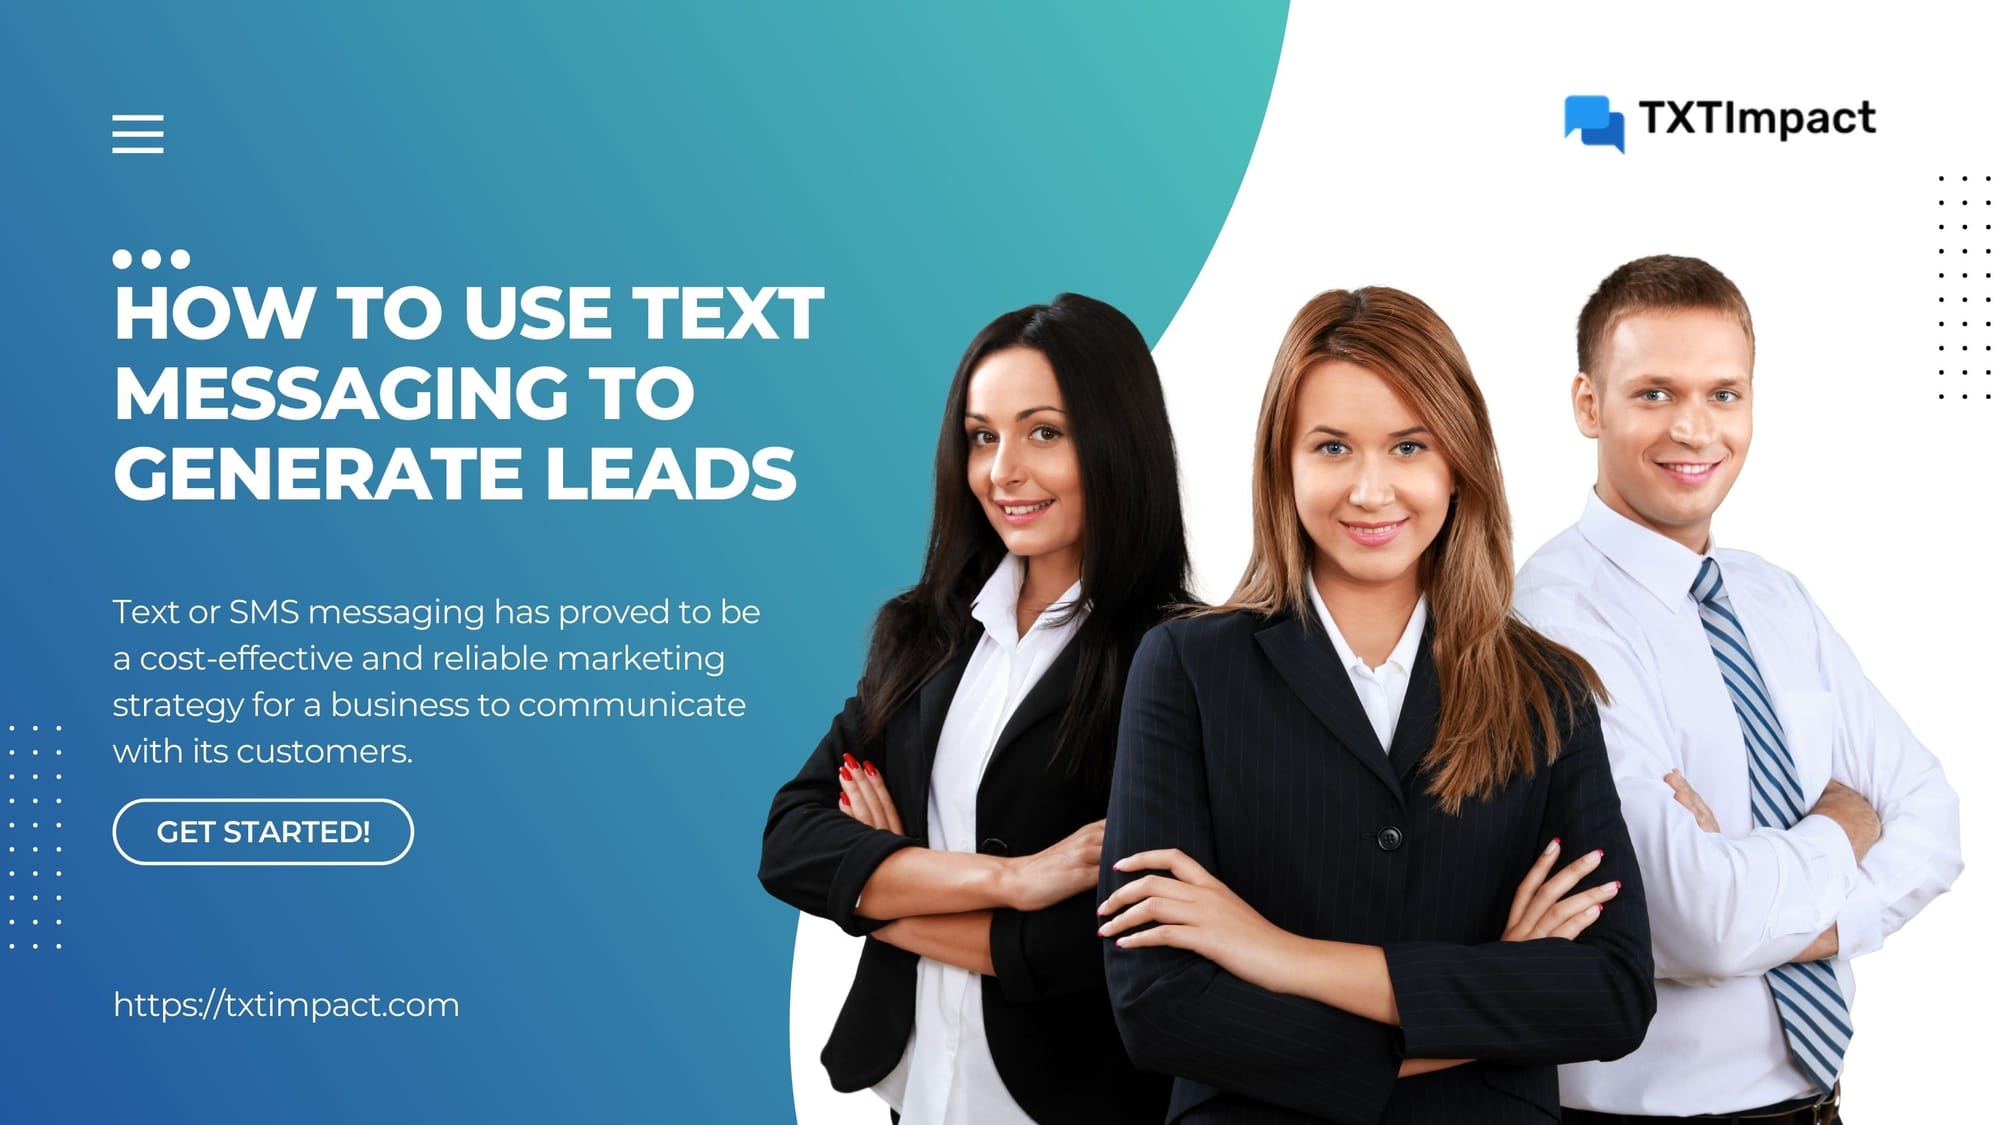 Use Text Messaging to Generate Leads .jpg